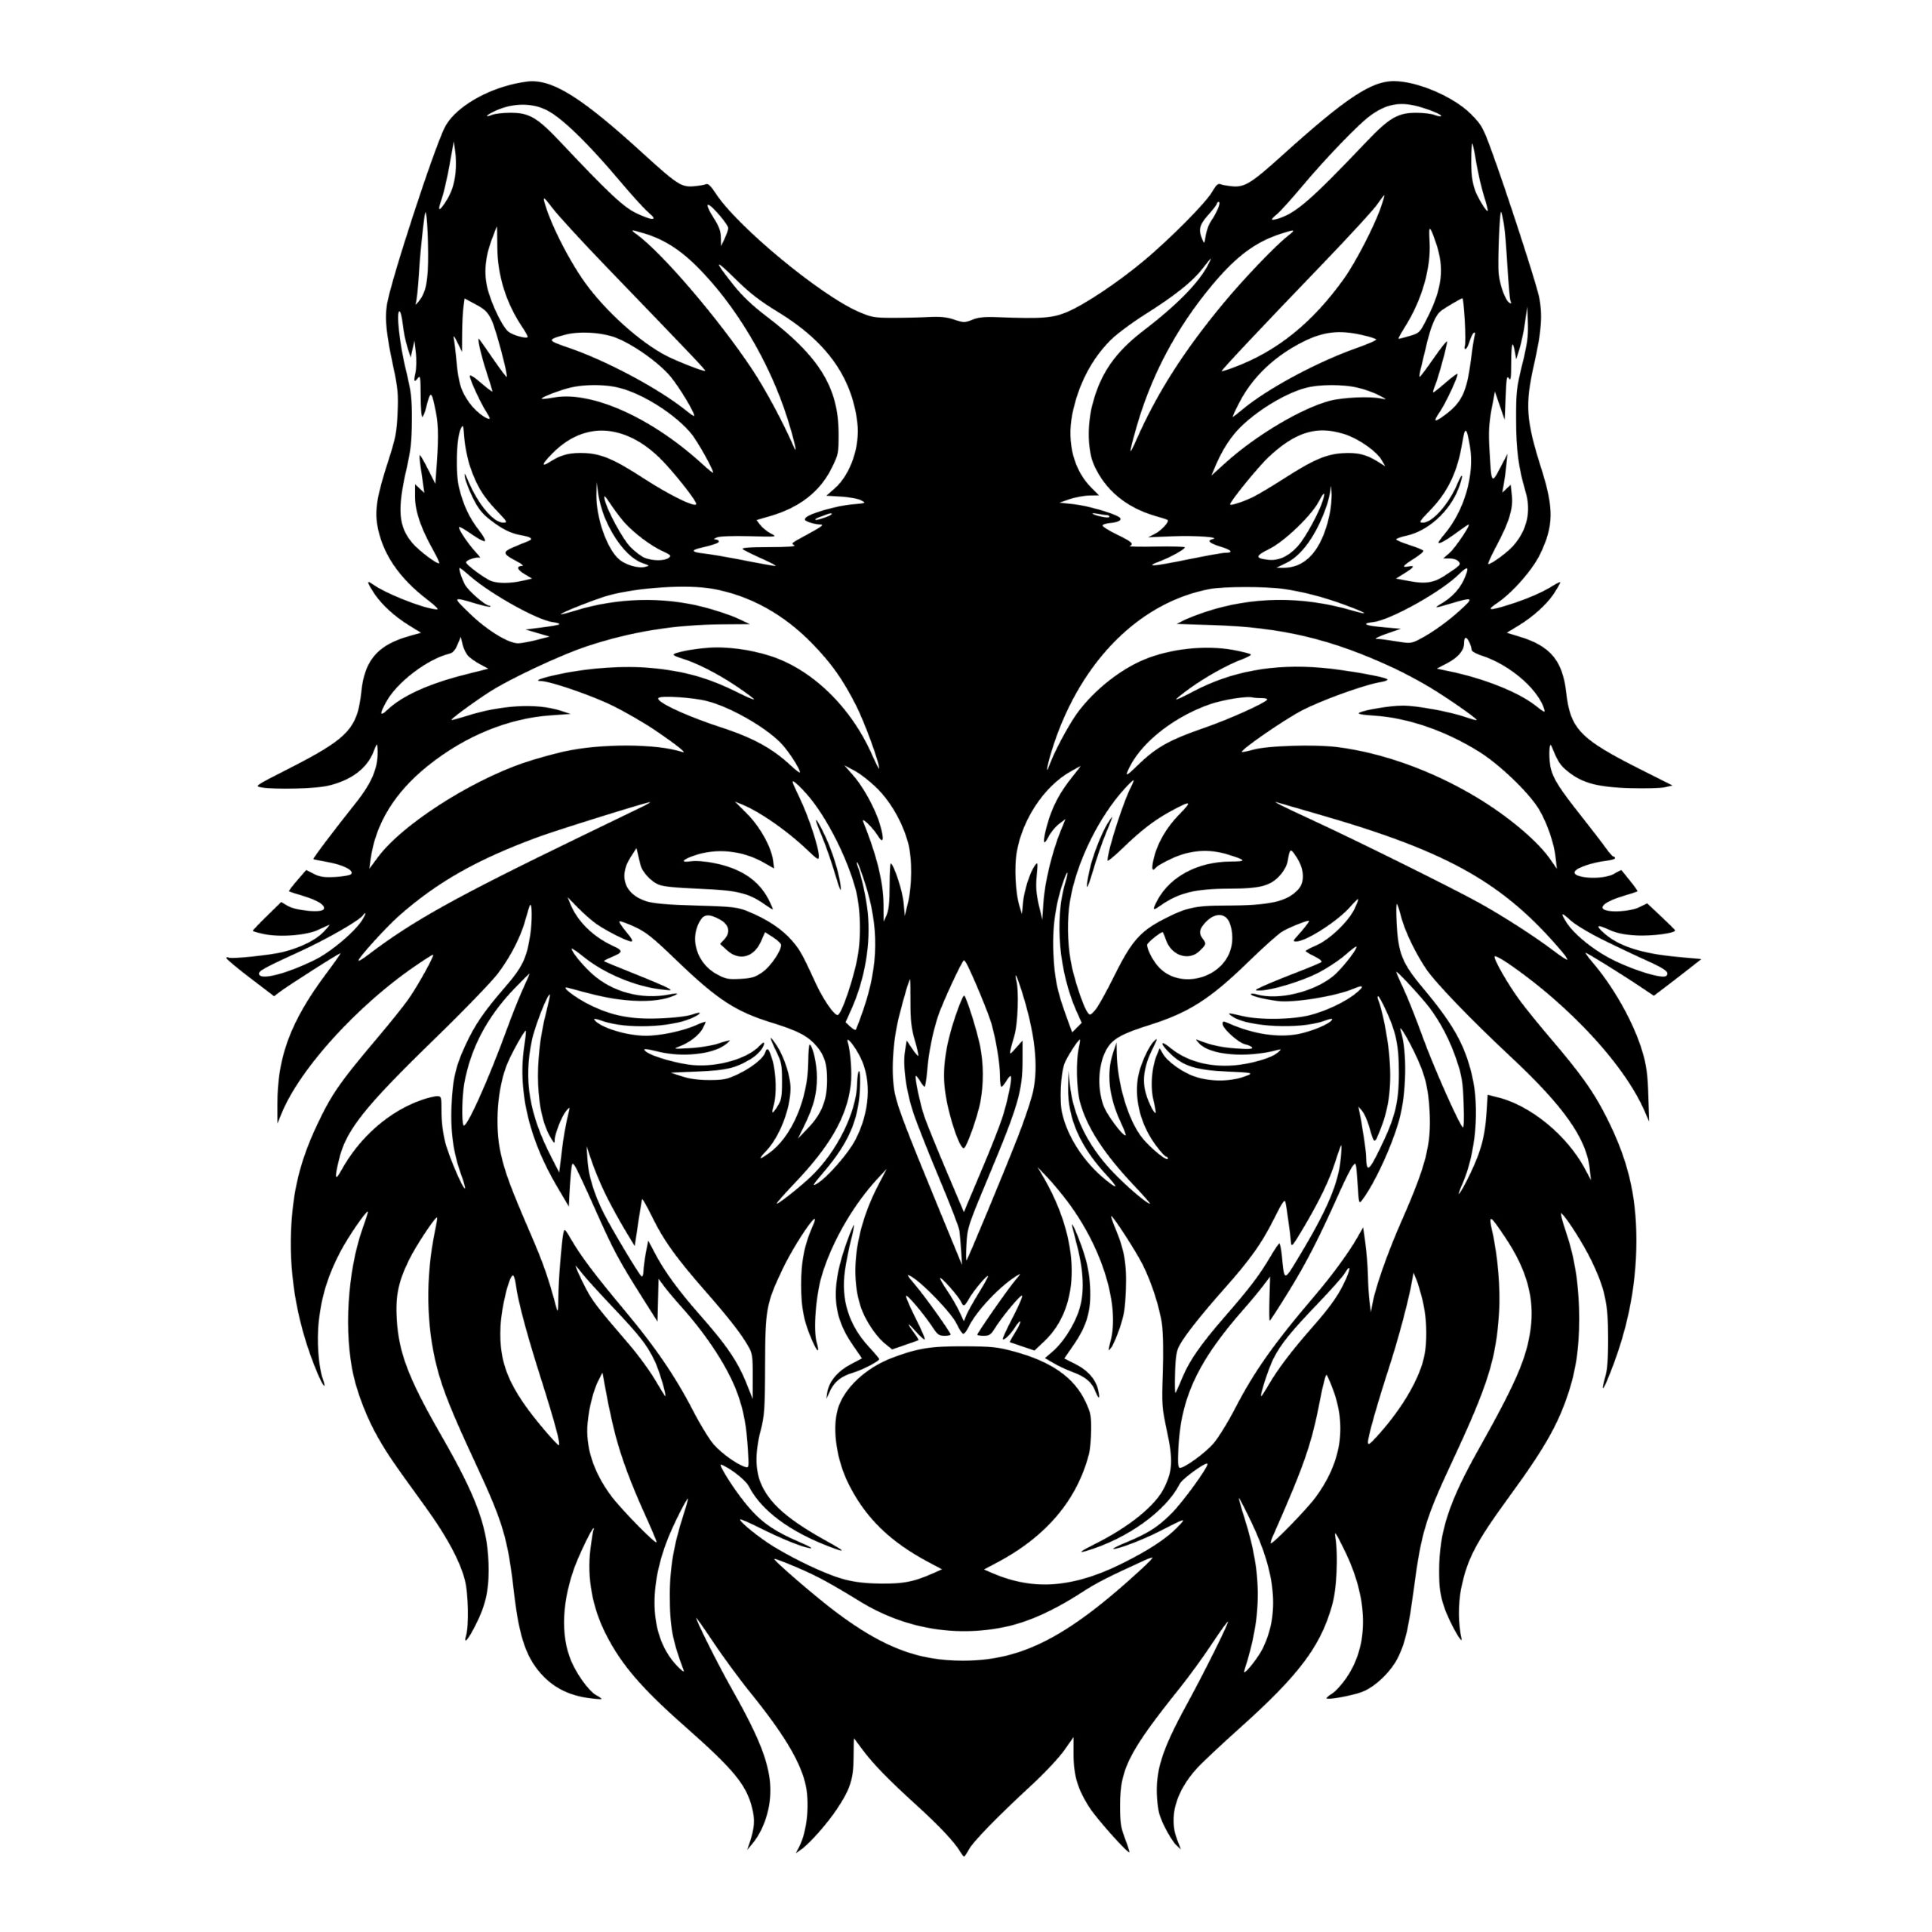 Abstract Wolf SVG File: Instant Download for Cricut, Silhouette, Laser